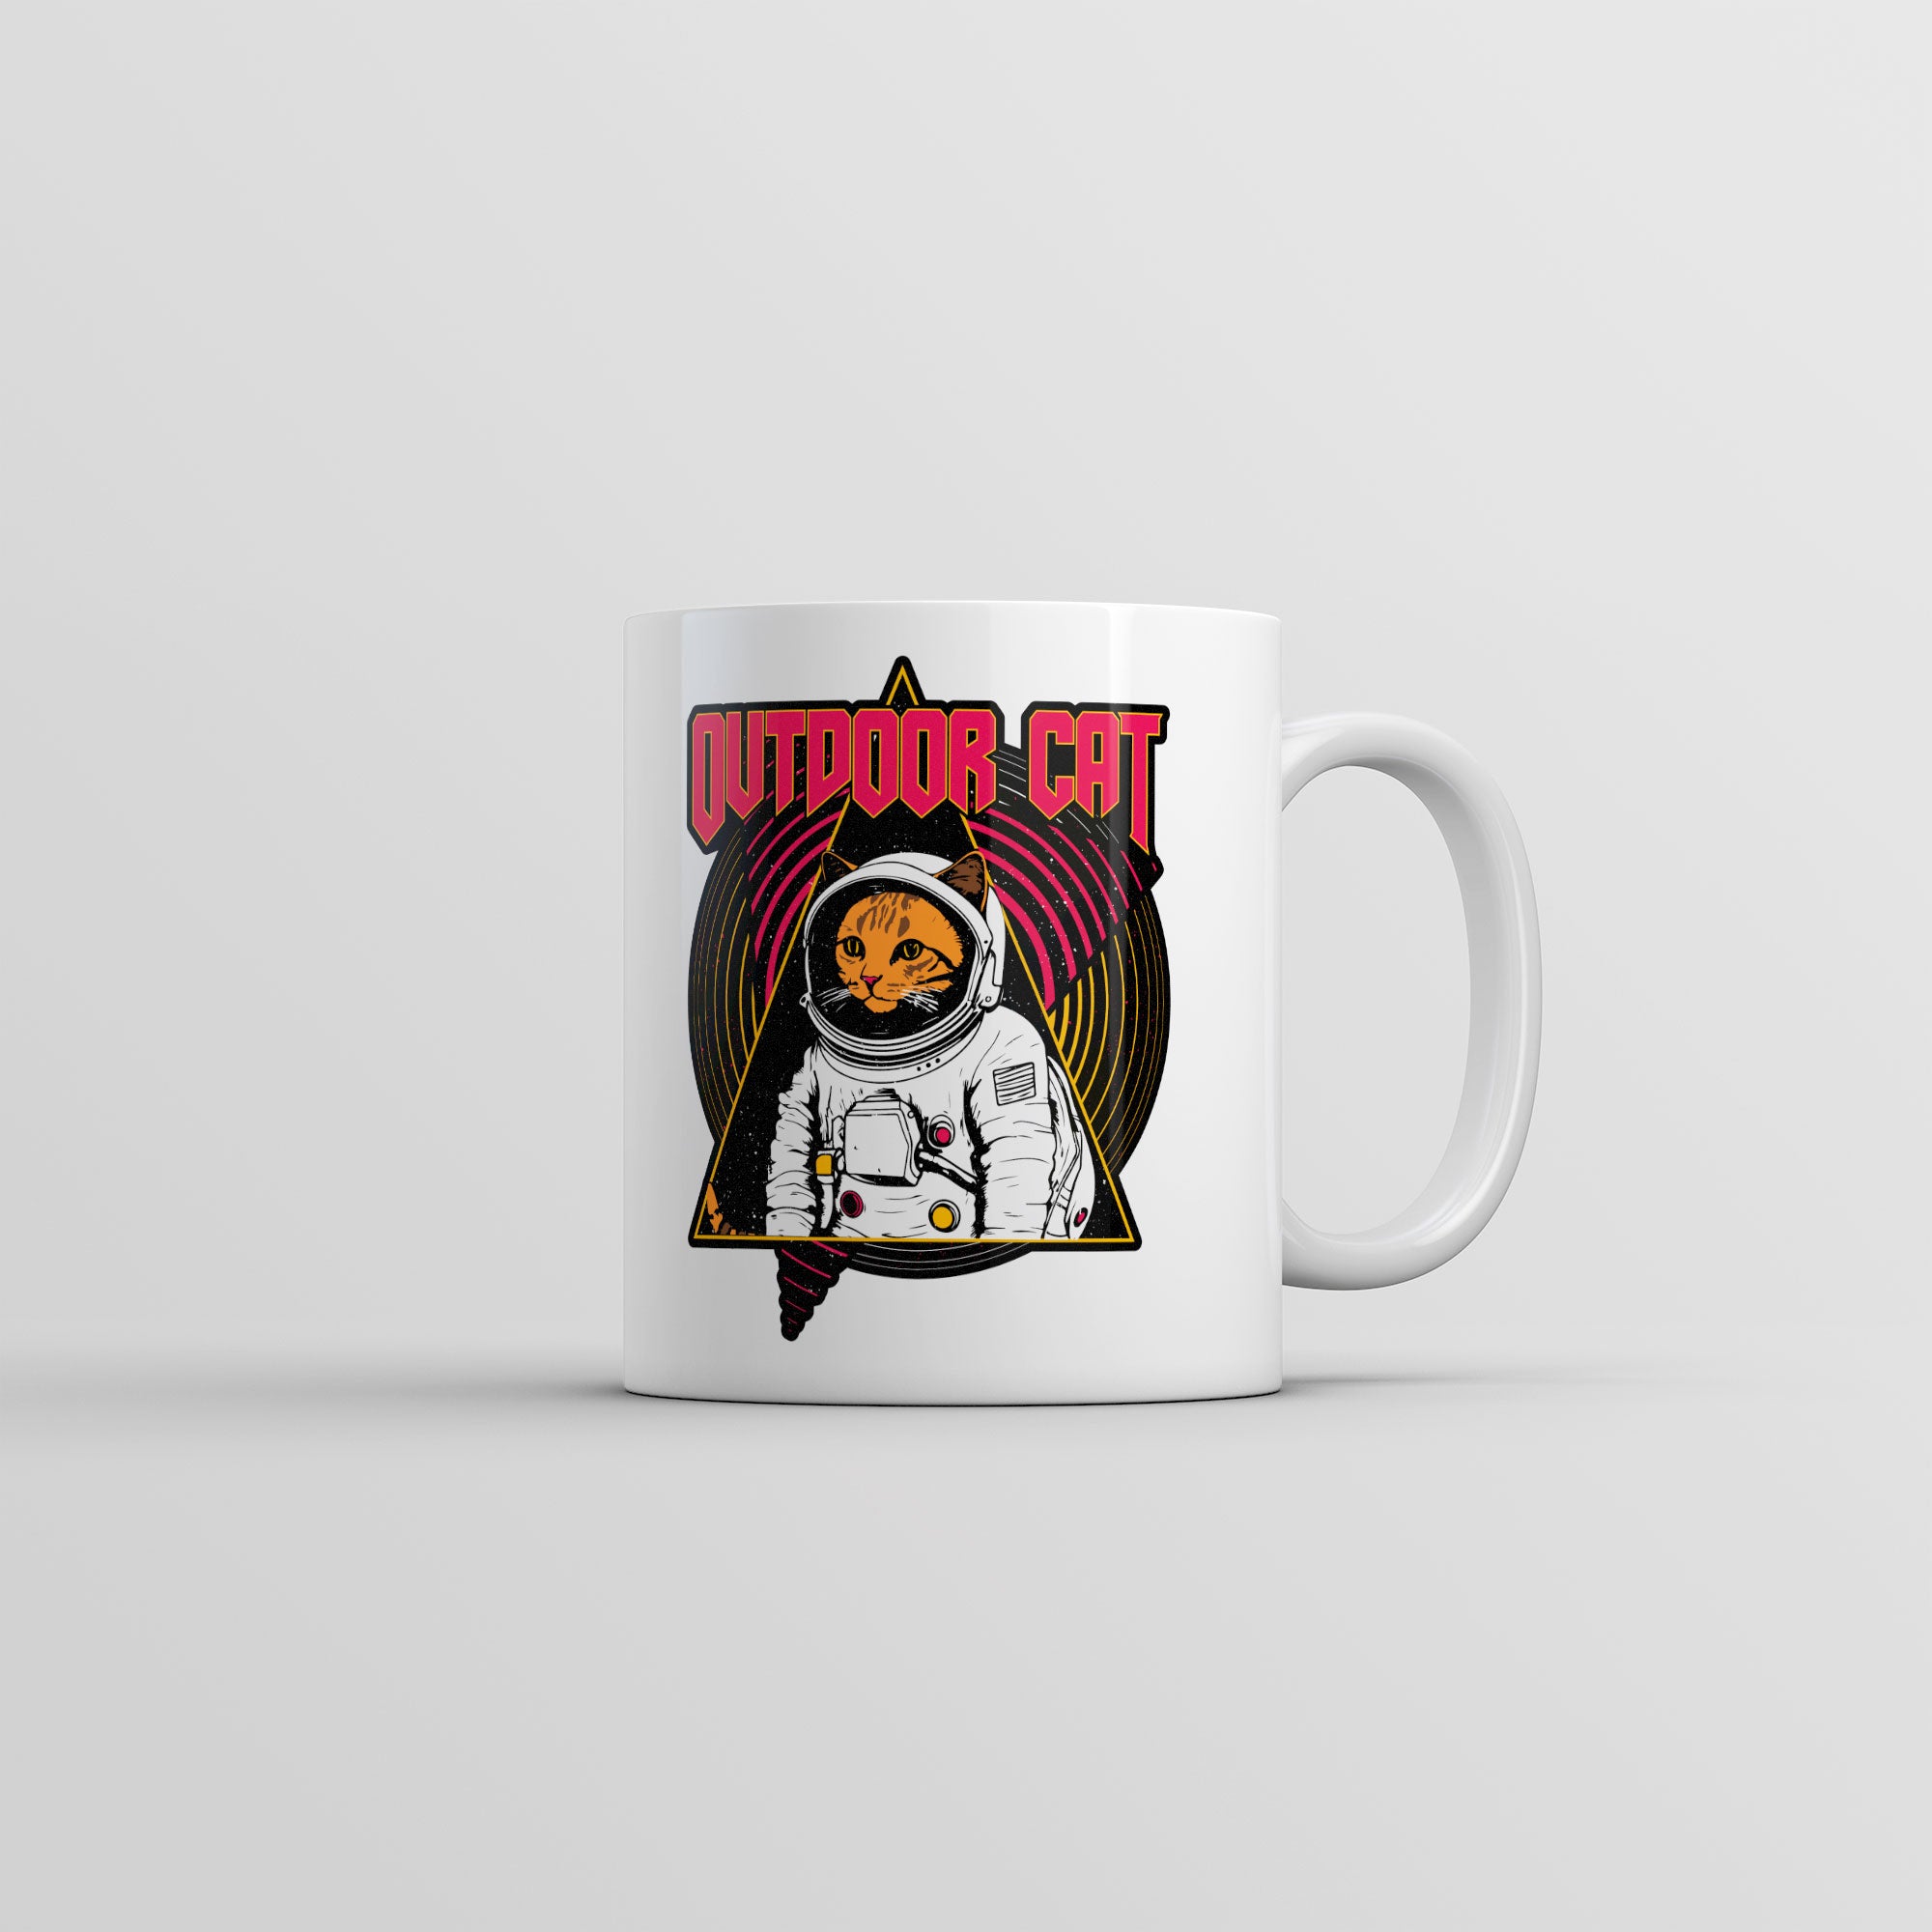 Funny White Outdoor Cat Space Coffee Mug Nerdy Cat space Tee